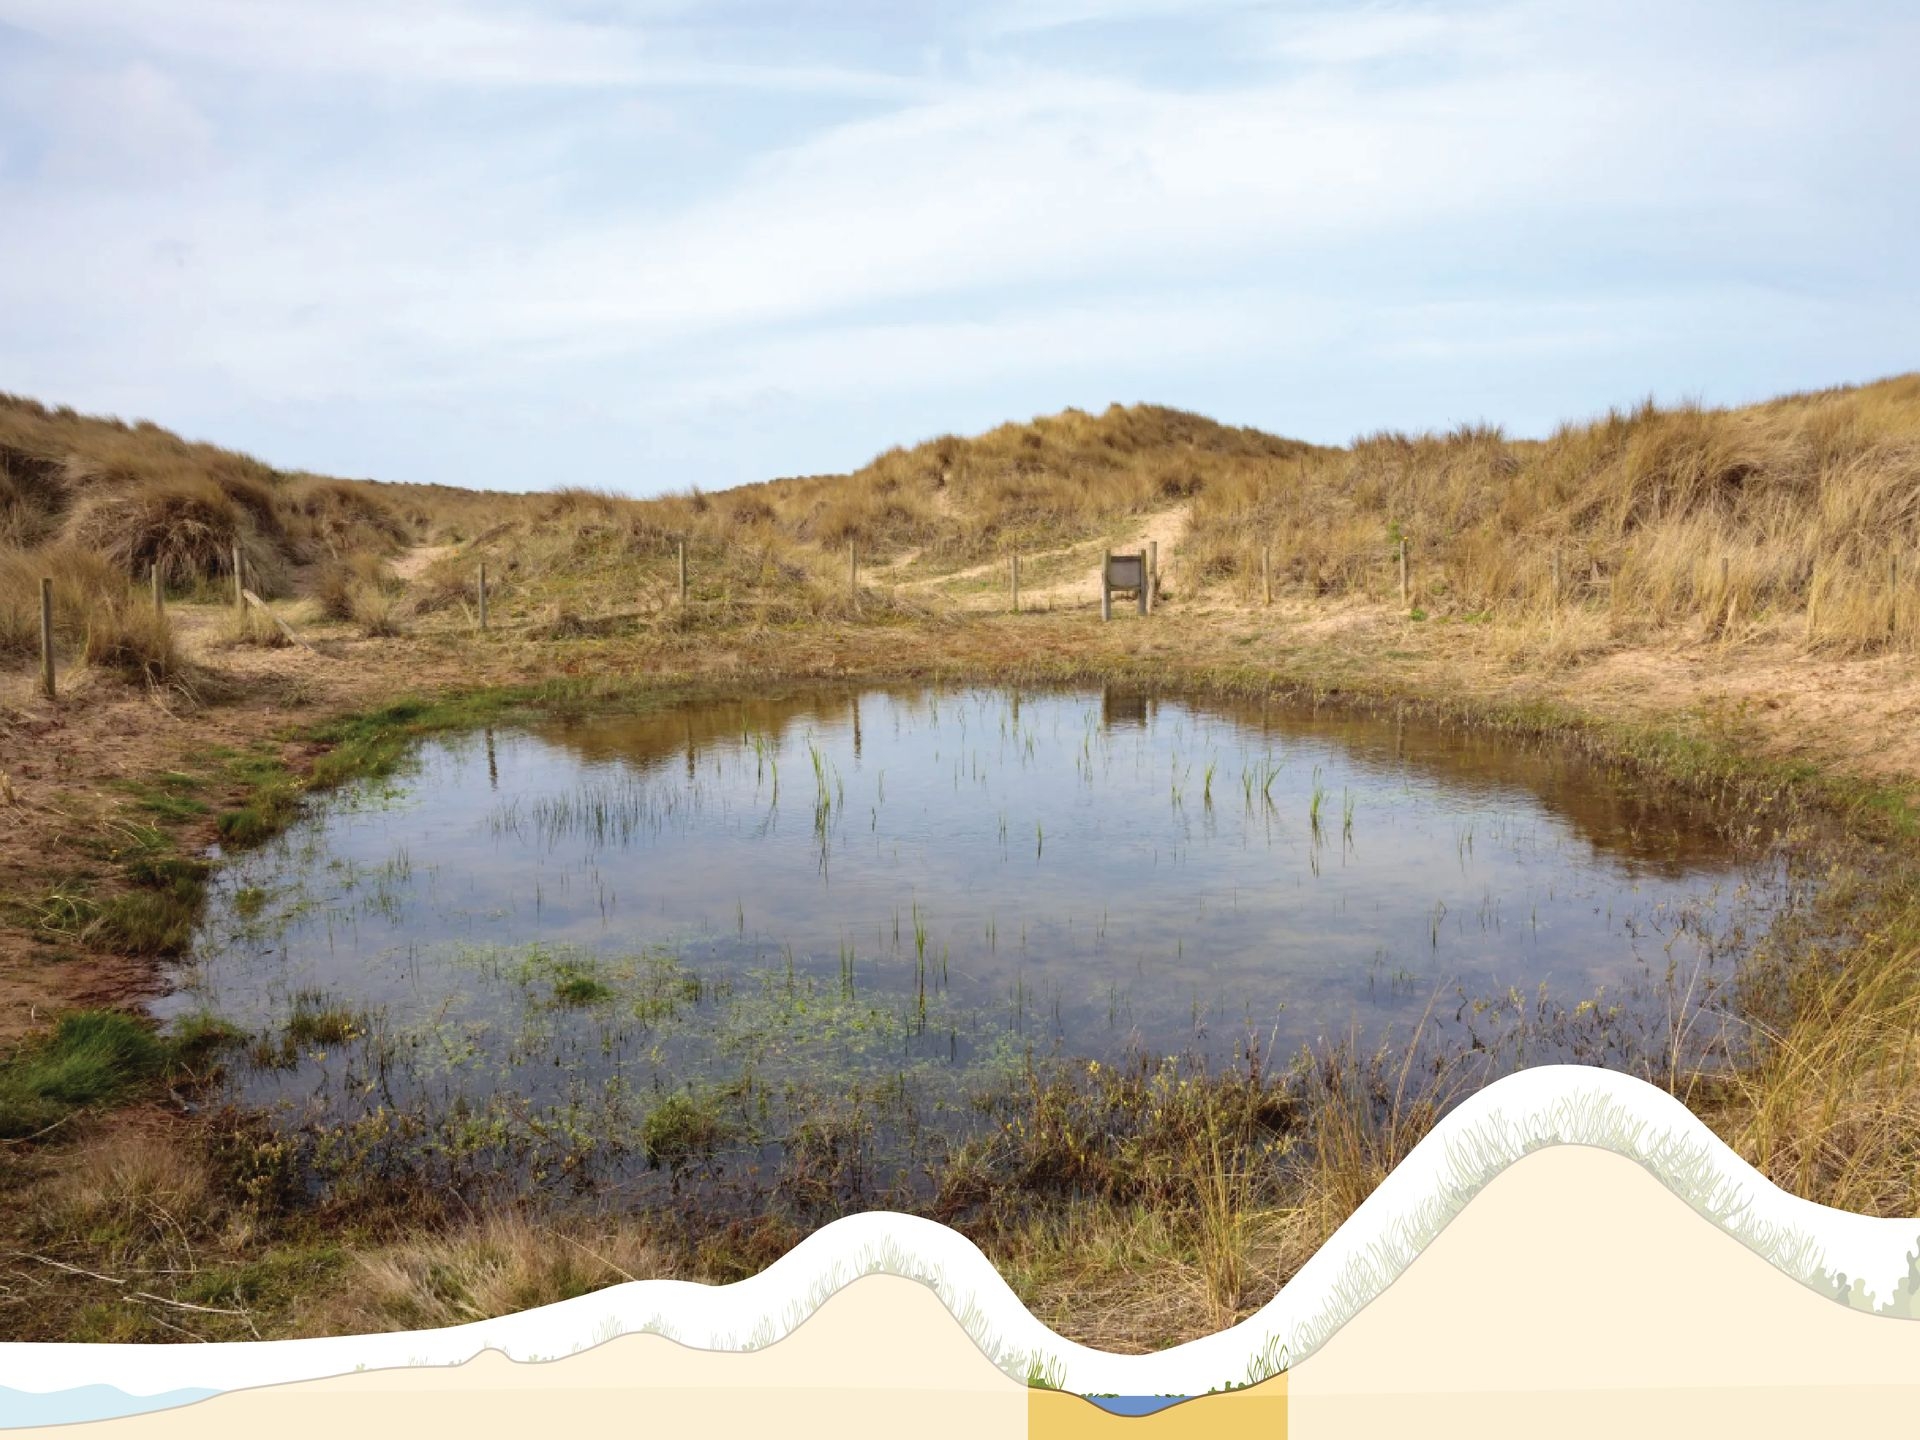 The lower wetter parts between the dunes.